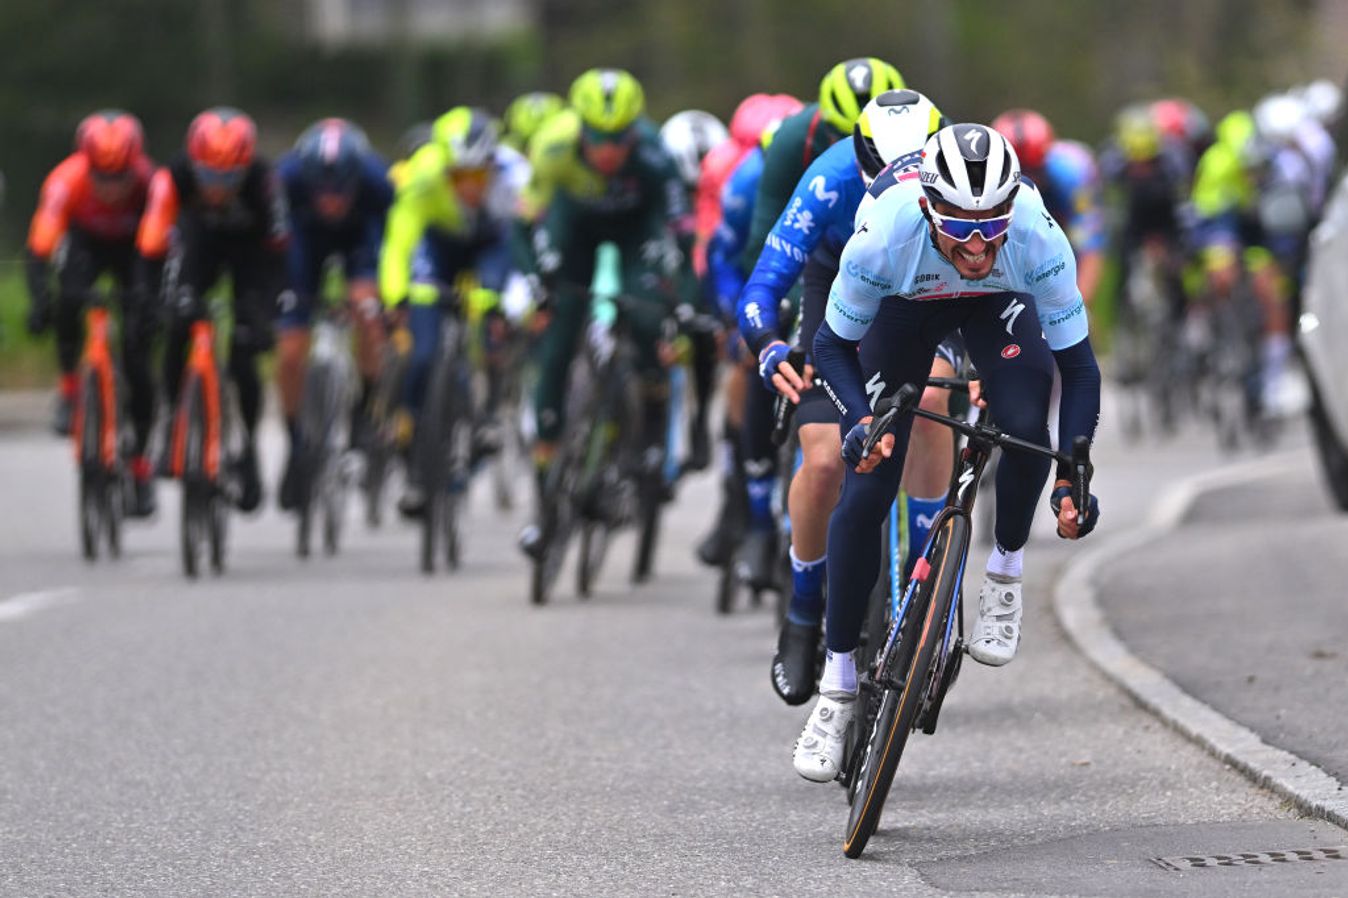 Julian Alaphilippe was among the long-range attackers